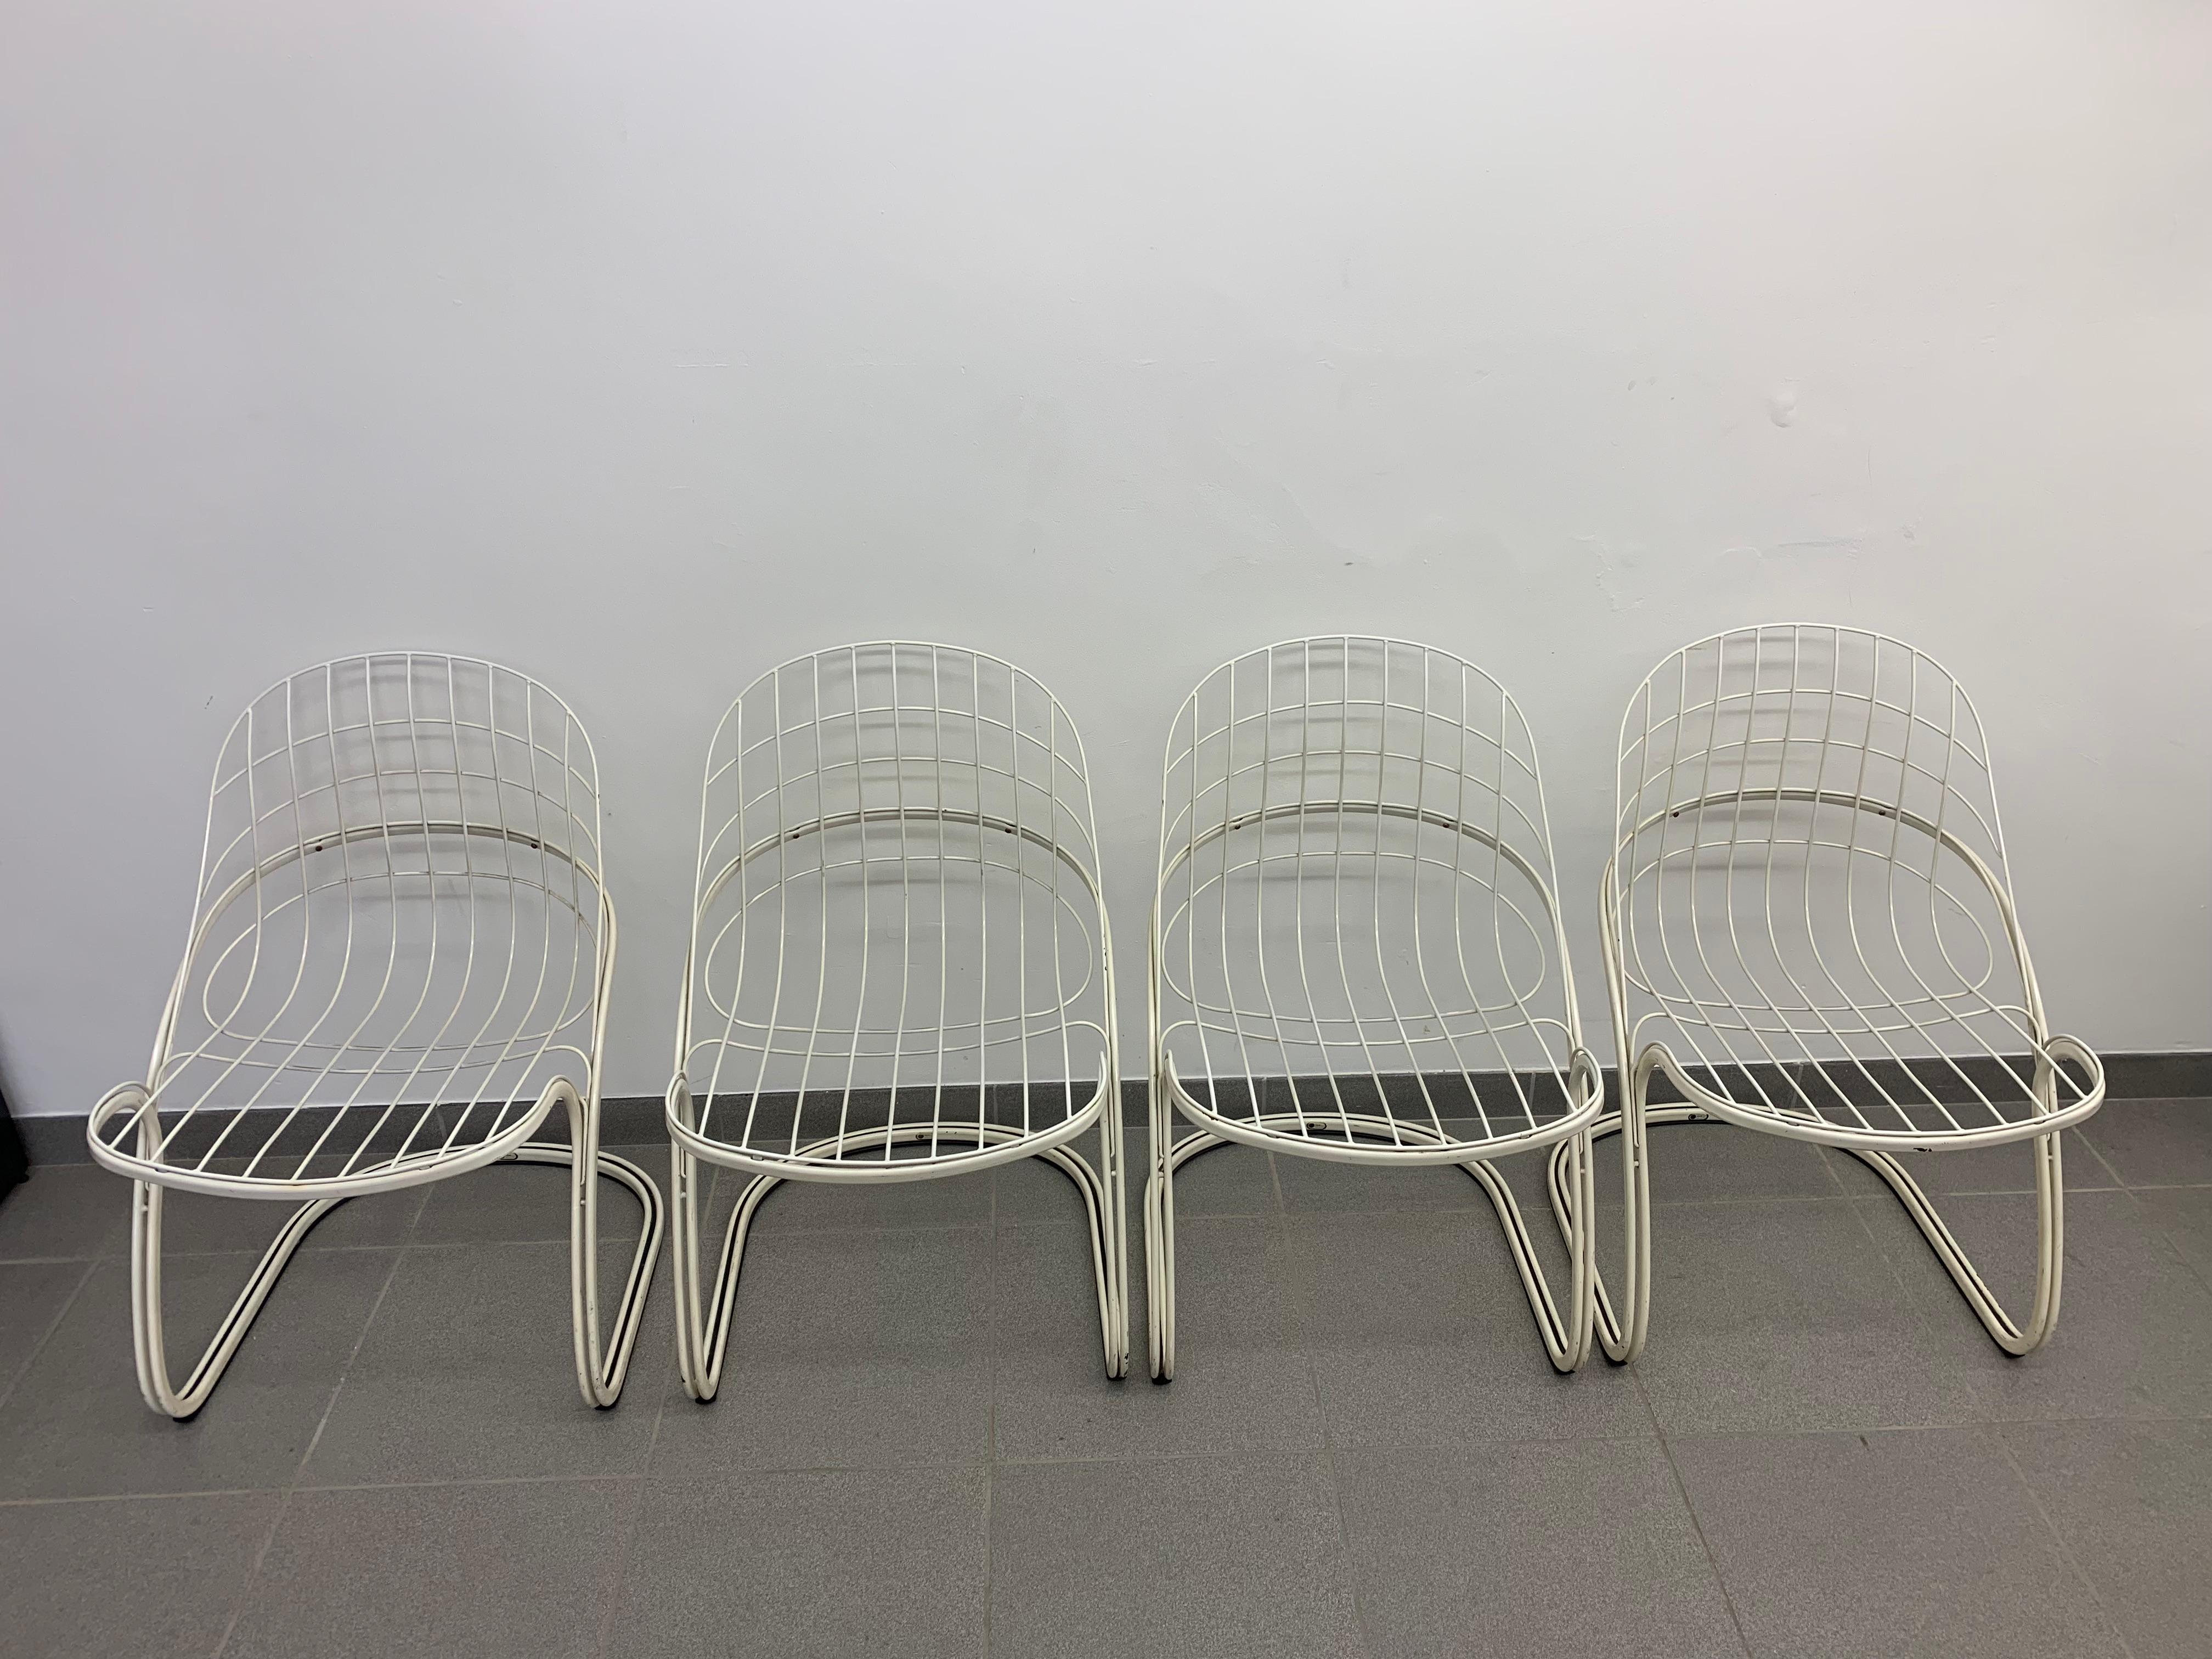 Sabrina chairs by Gastone Rinaldi for Thema, 1970s For Sale 2